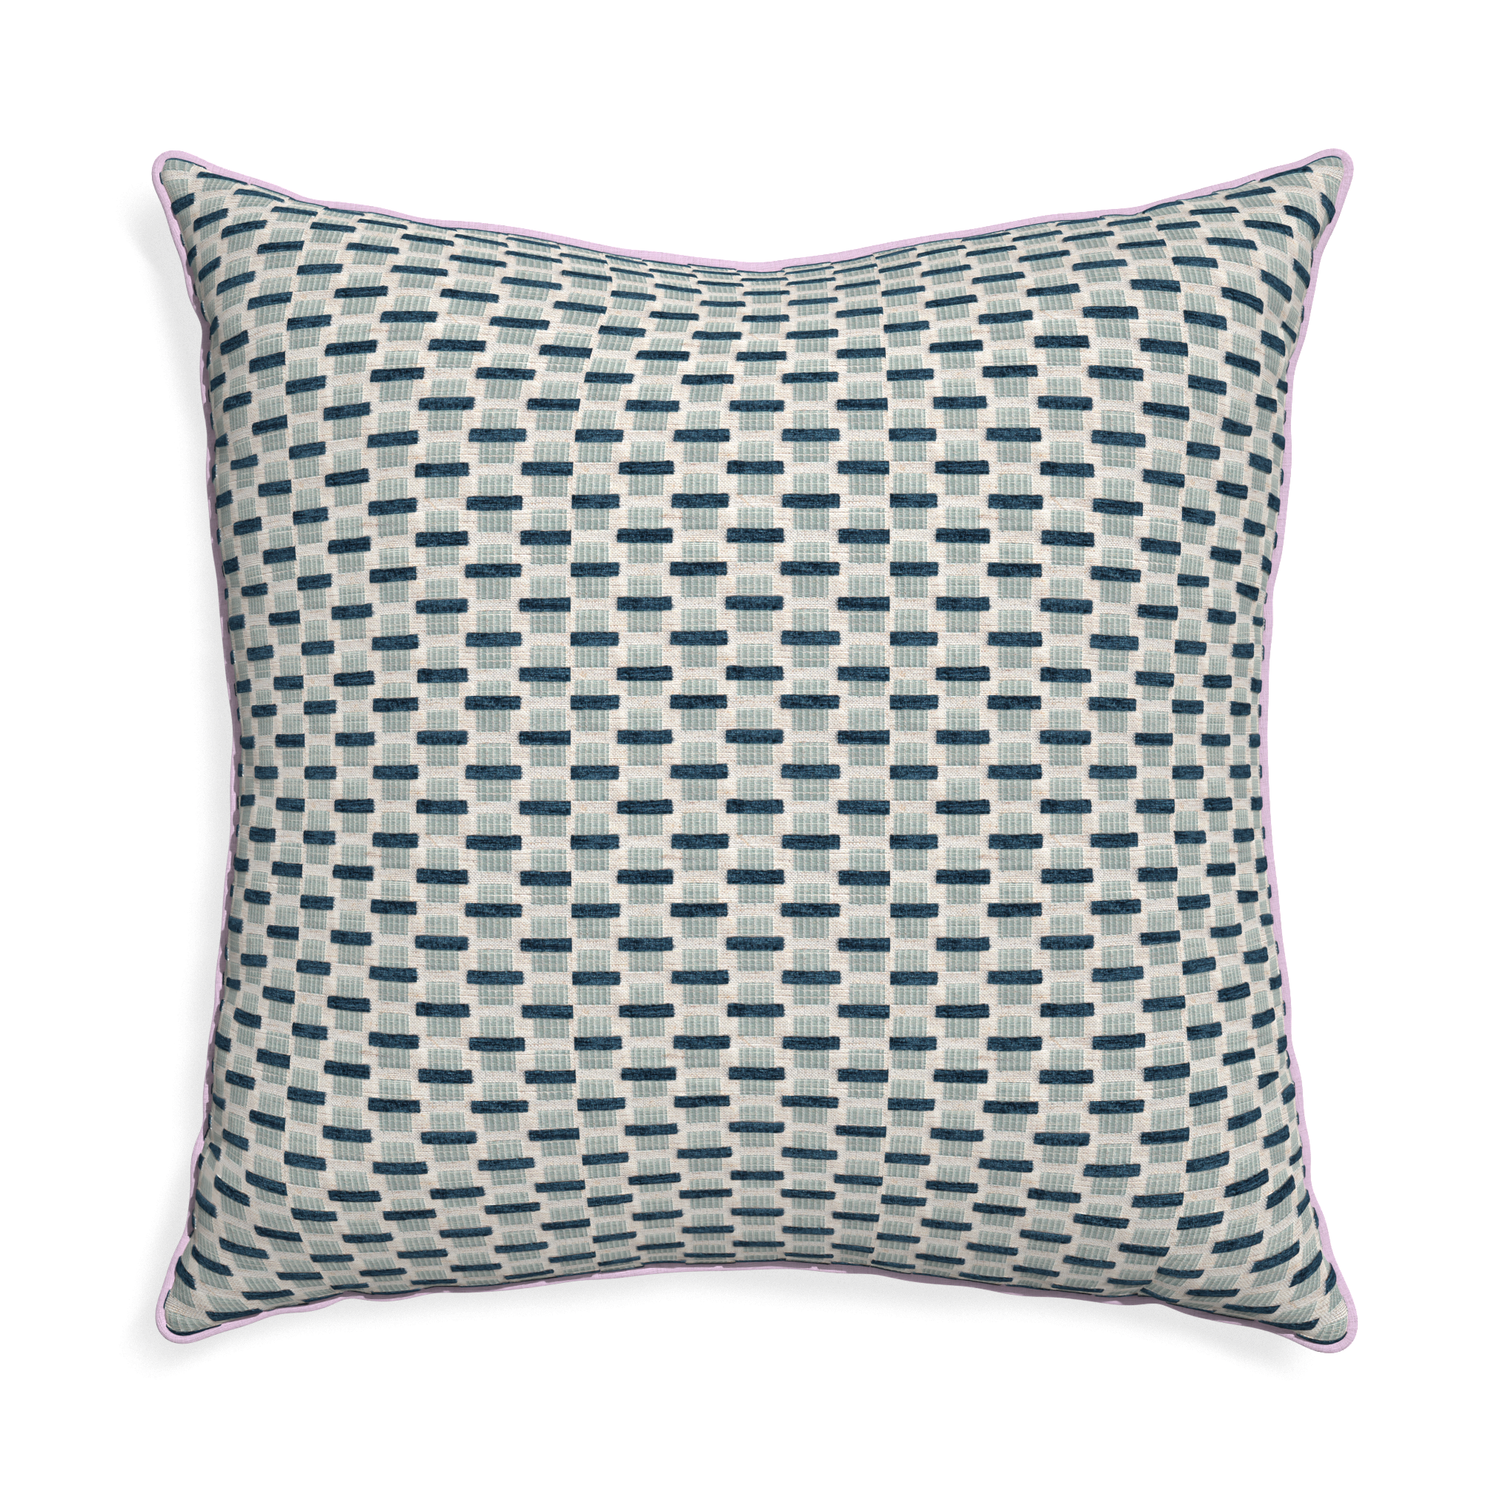 Euro-sham willow amalfi custom blue geometric chenillepillow with l piping on white background